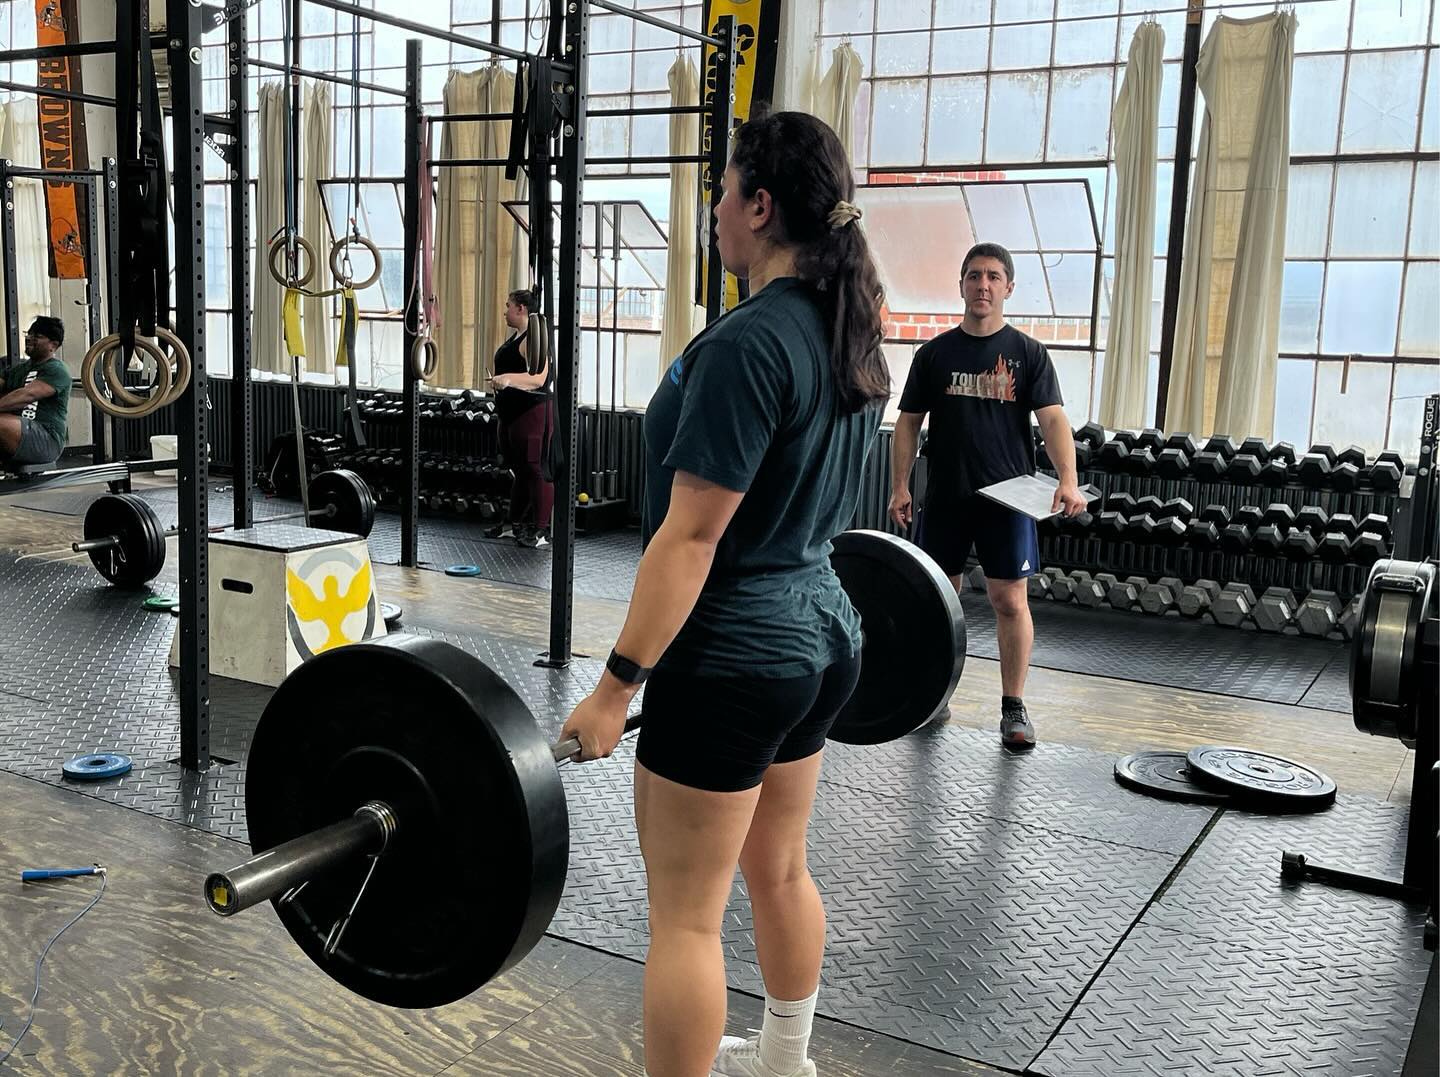 Have you recovered from The Open yet? We are so proud of our athletes for how they took on the 3 workouts! This year is shaping up to be a good one. 

 #BirdtownStrength #BirdtownStrong #FunctionalFitness #BeBetter #RedefiningStrength #TeamWorkMakesTheDreamWork #WeAreBirdtown #Lakewood #Ohio #LakewoodOhio